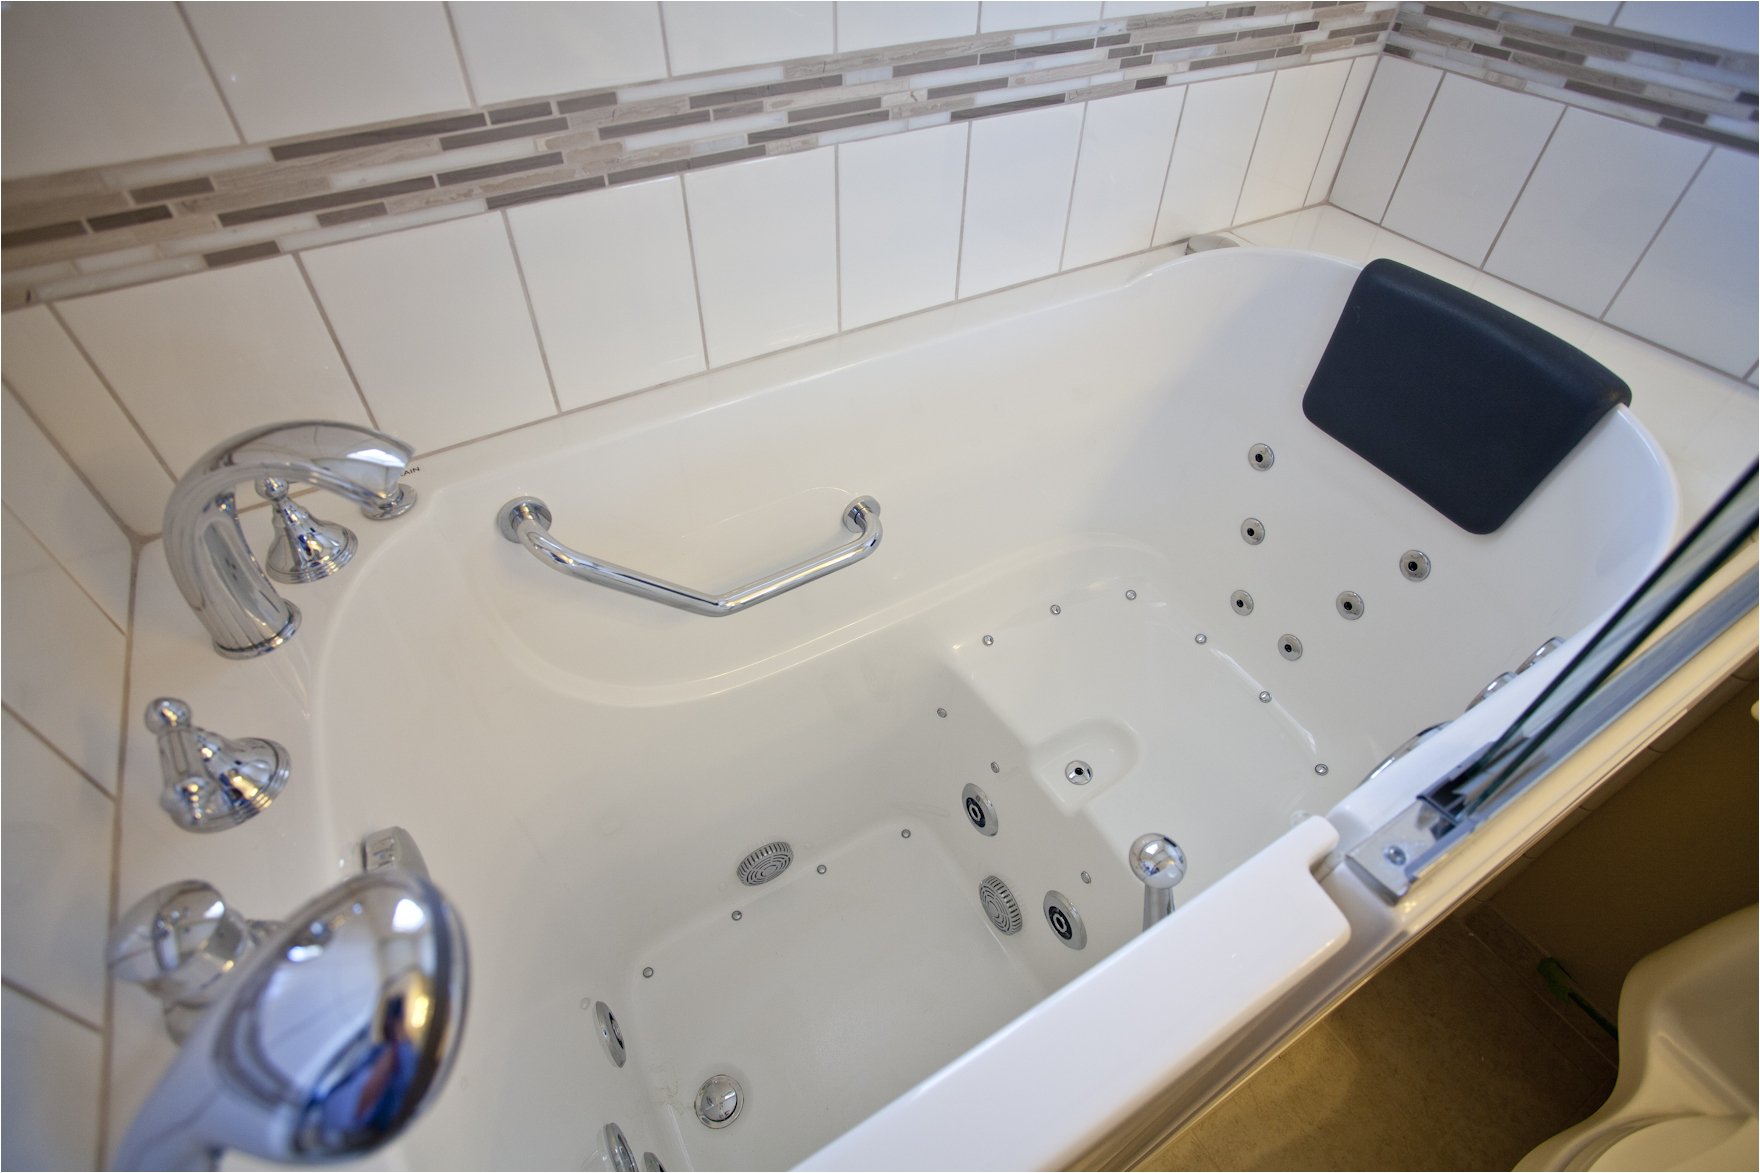 customize the look of your bathroom with magnificent deep bathtubs